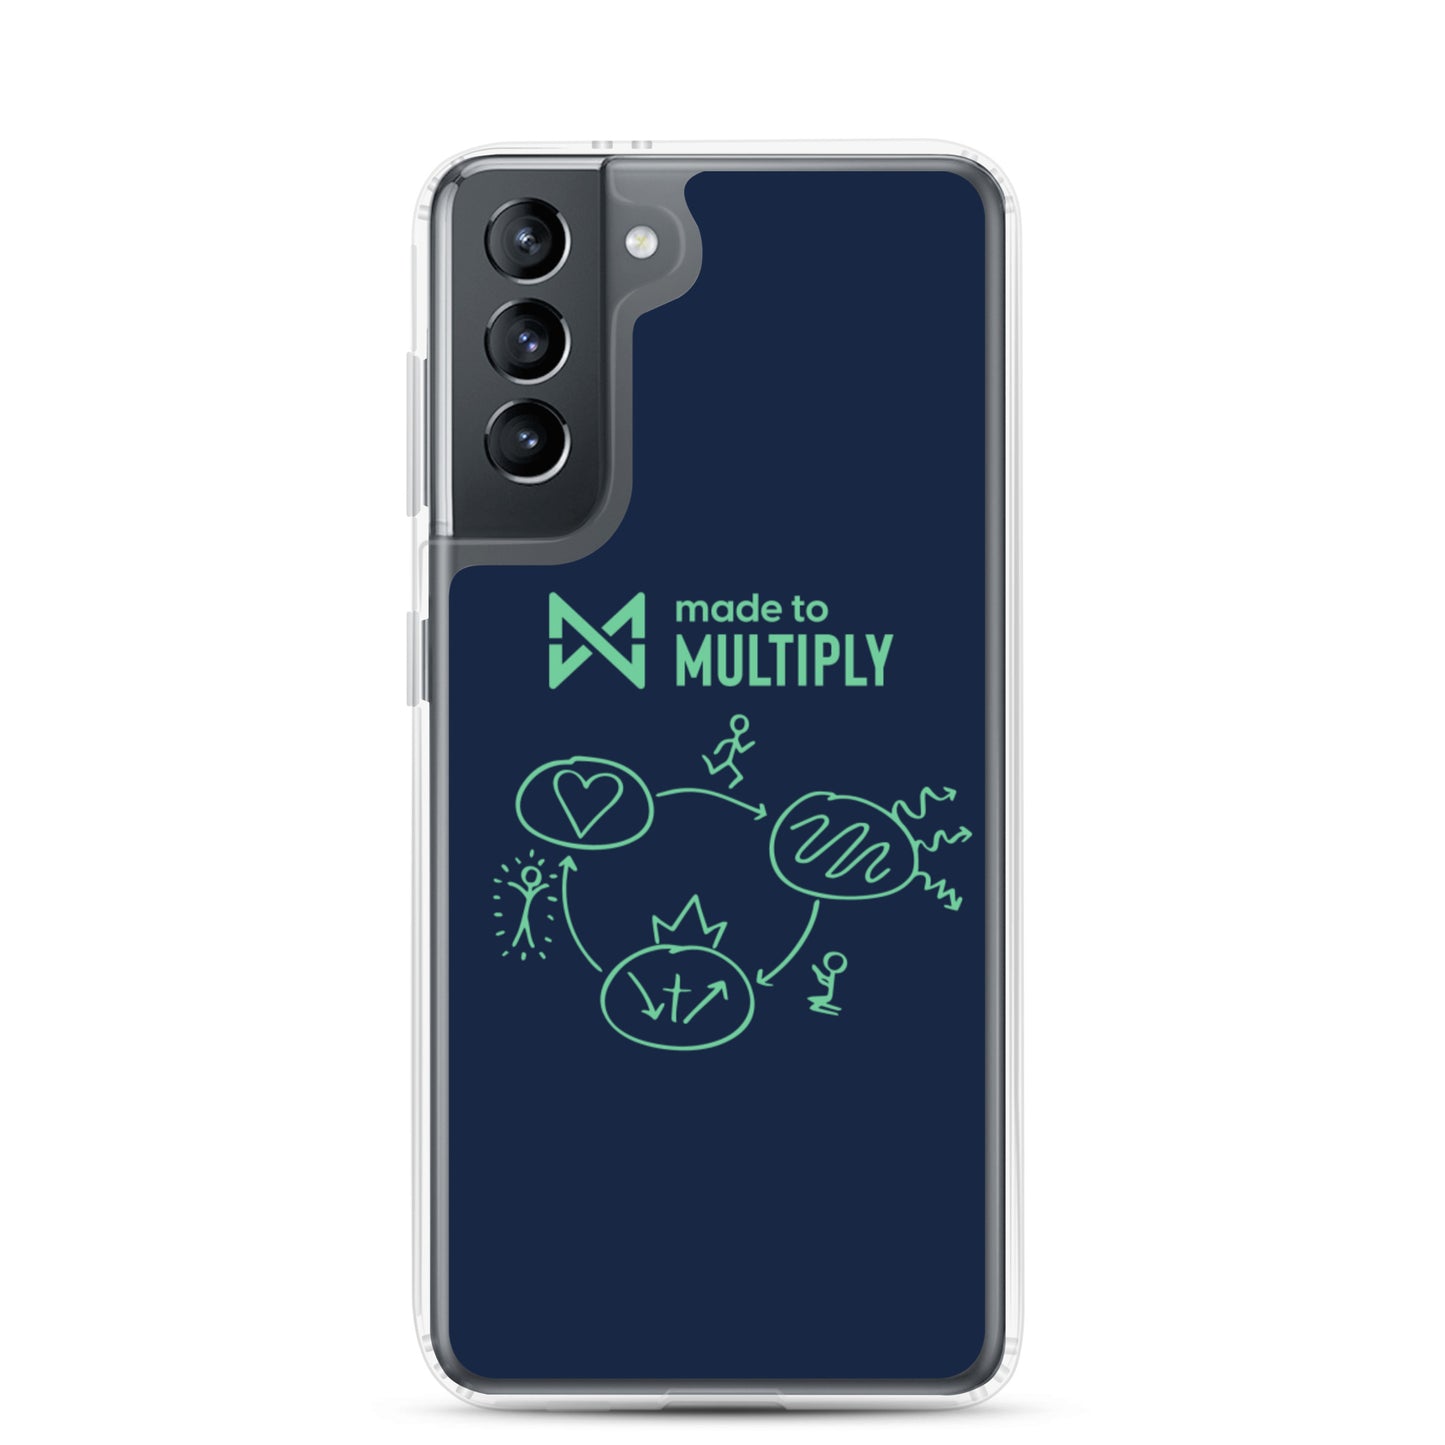 Made to Multiply - Samsung Case